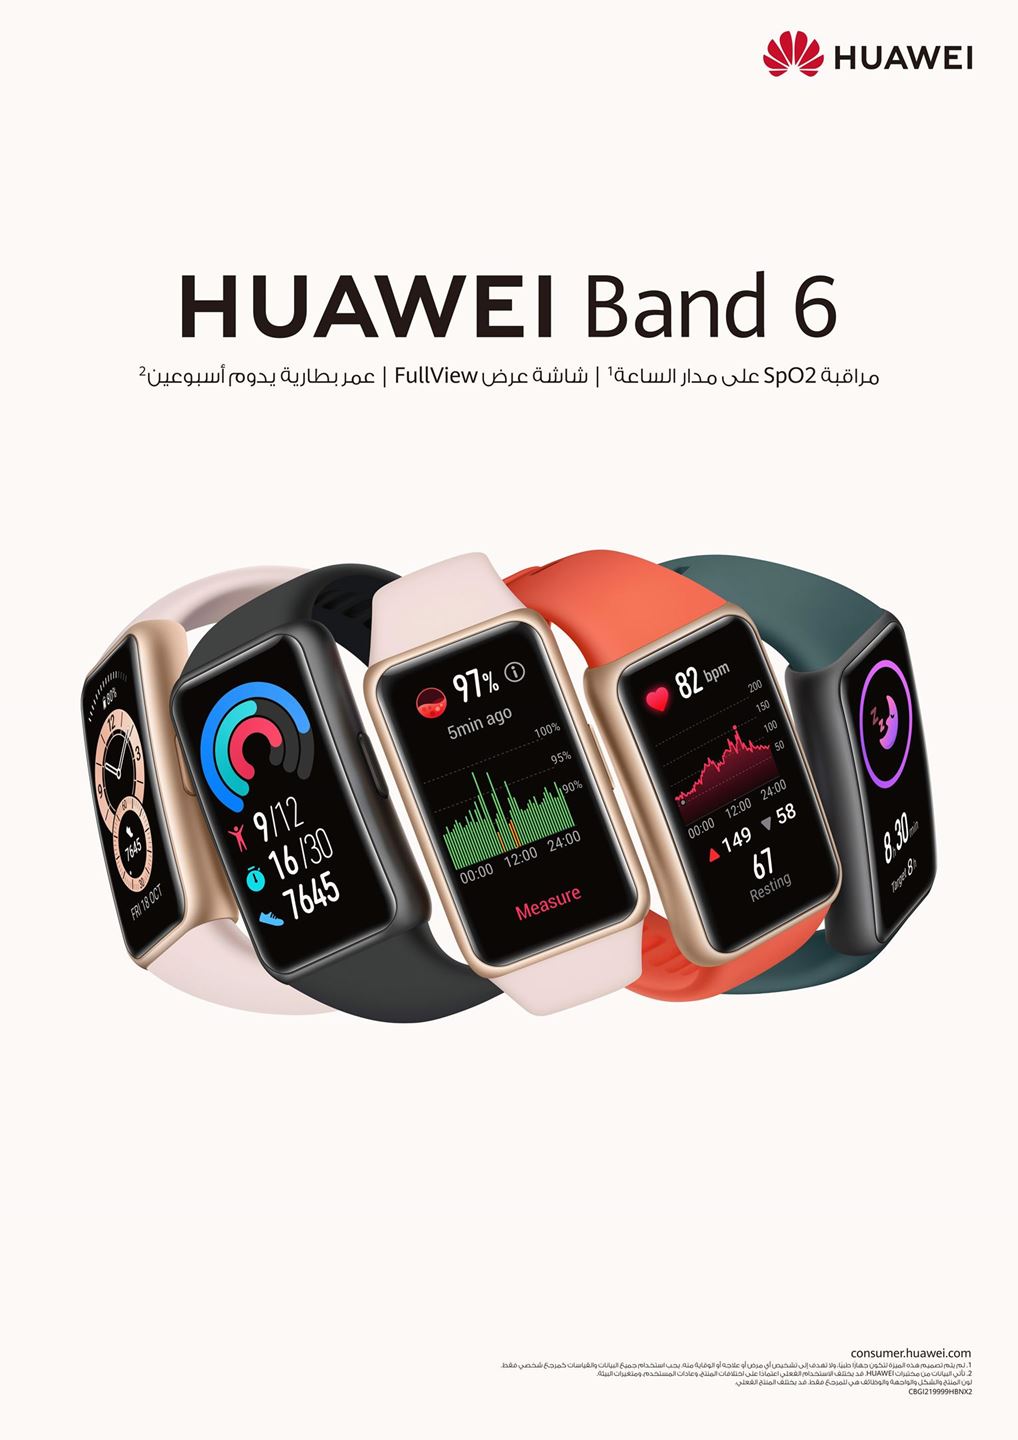 Huawei launches the all new HUAWEI Band 6 in Kuwait